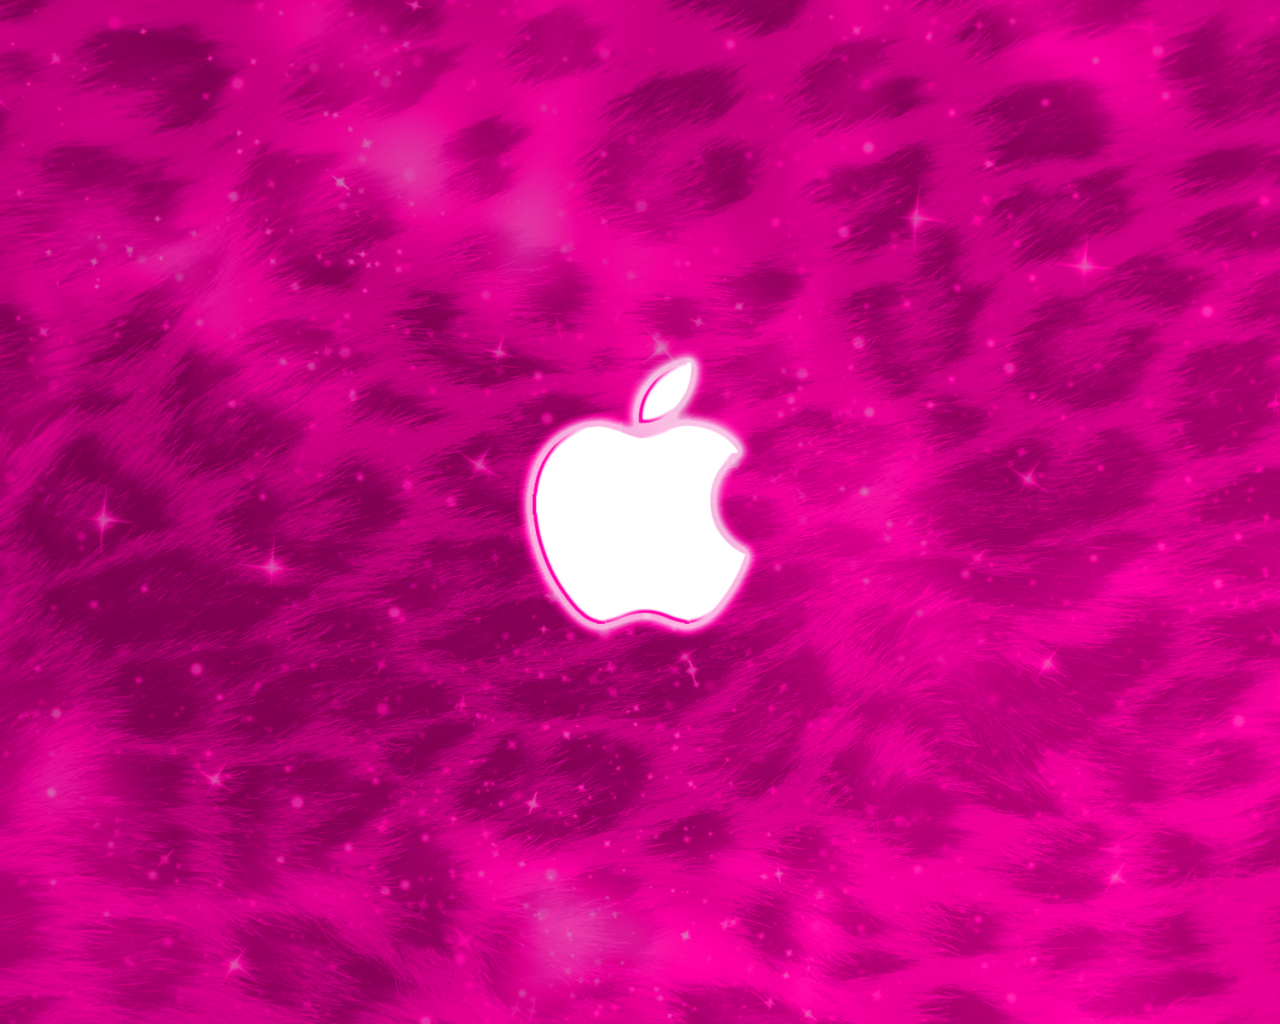 Free download Apple Theme JailbreakThemescom Cute and Girly Themes Wallpaper [1647x1200] for your Desktop, Mobile & Tablet. Explore Cute Apple Wallpaper. Apple Computer Wallpaper, Apple Wallpaper, Apple Background Wallpaper